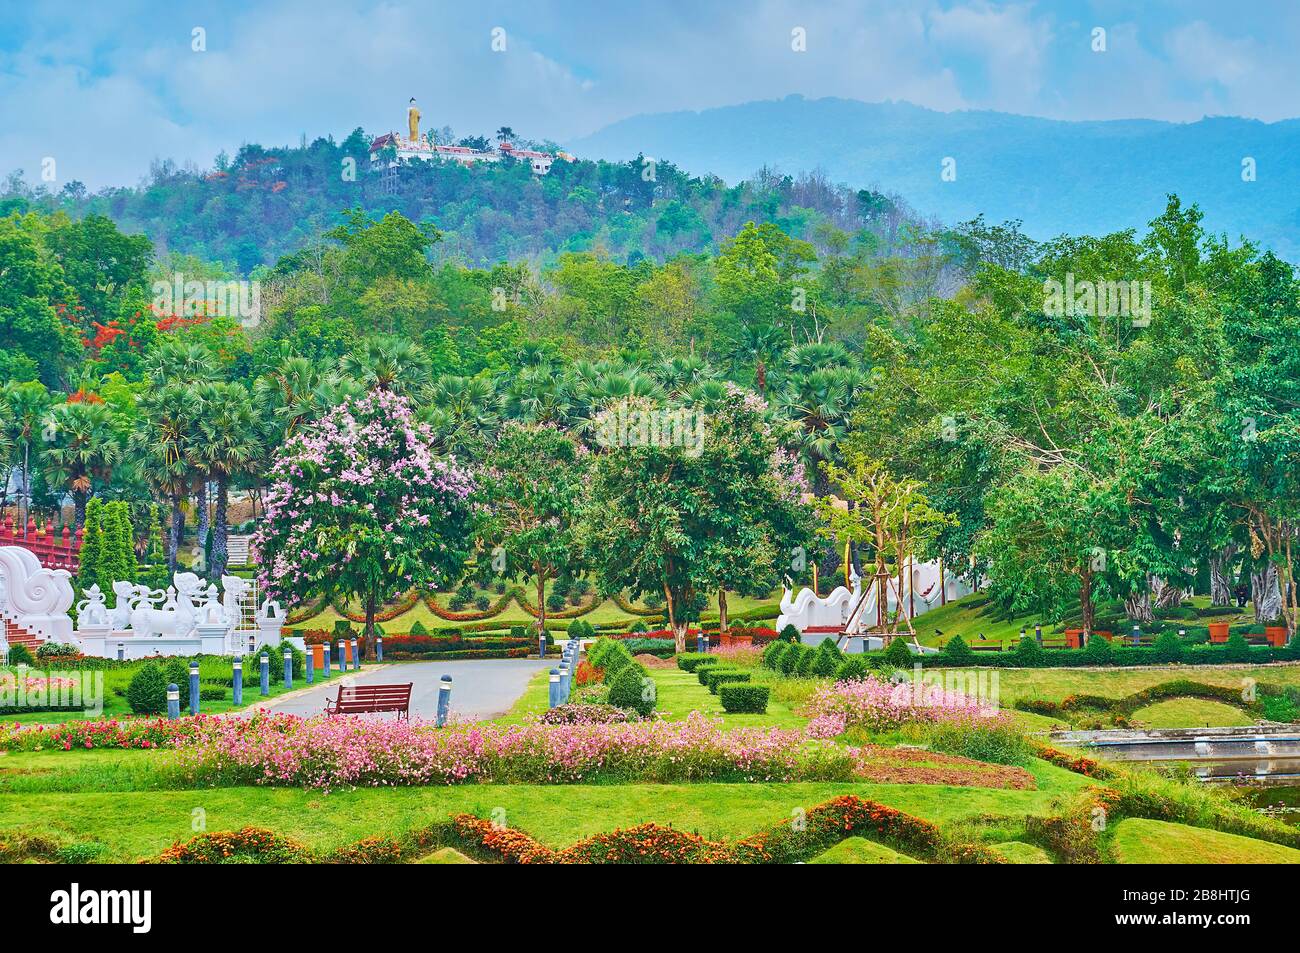 Enjoy green alleys of Rajapruek park with colorful flower beds, blooming trees, topiary bushes and Wat Phra That Doi Kham temple atop the mountain on Stock Photo